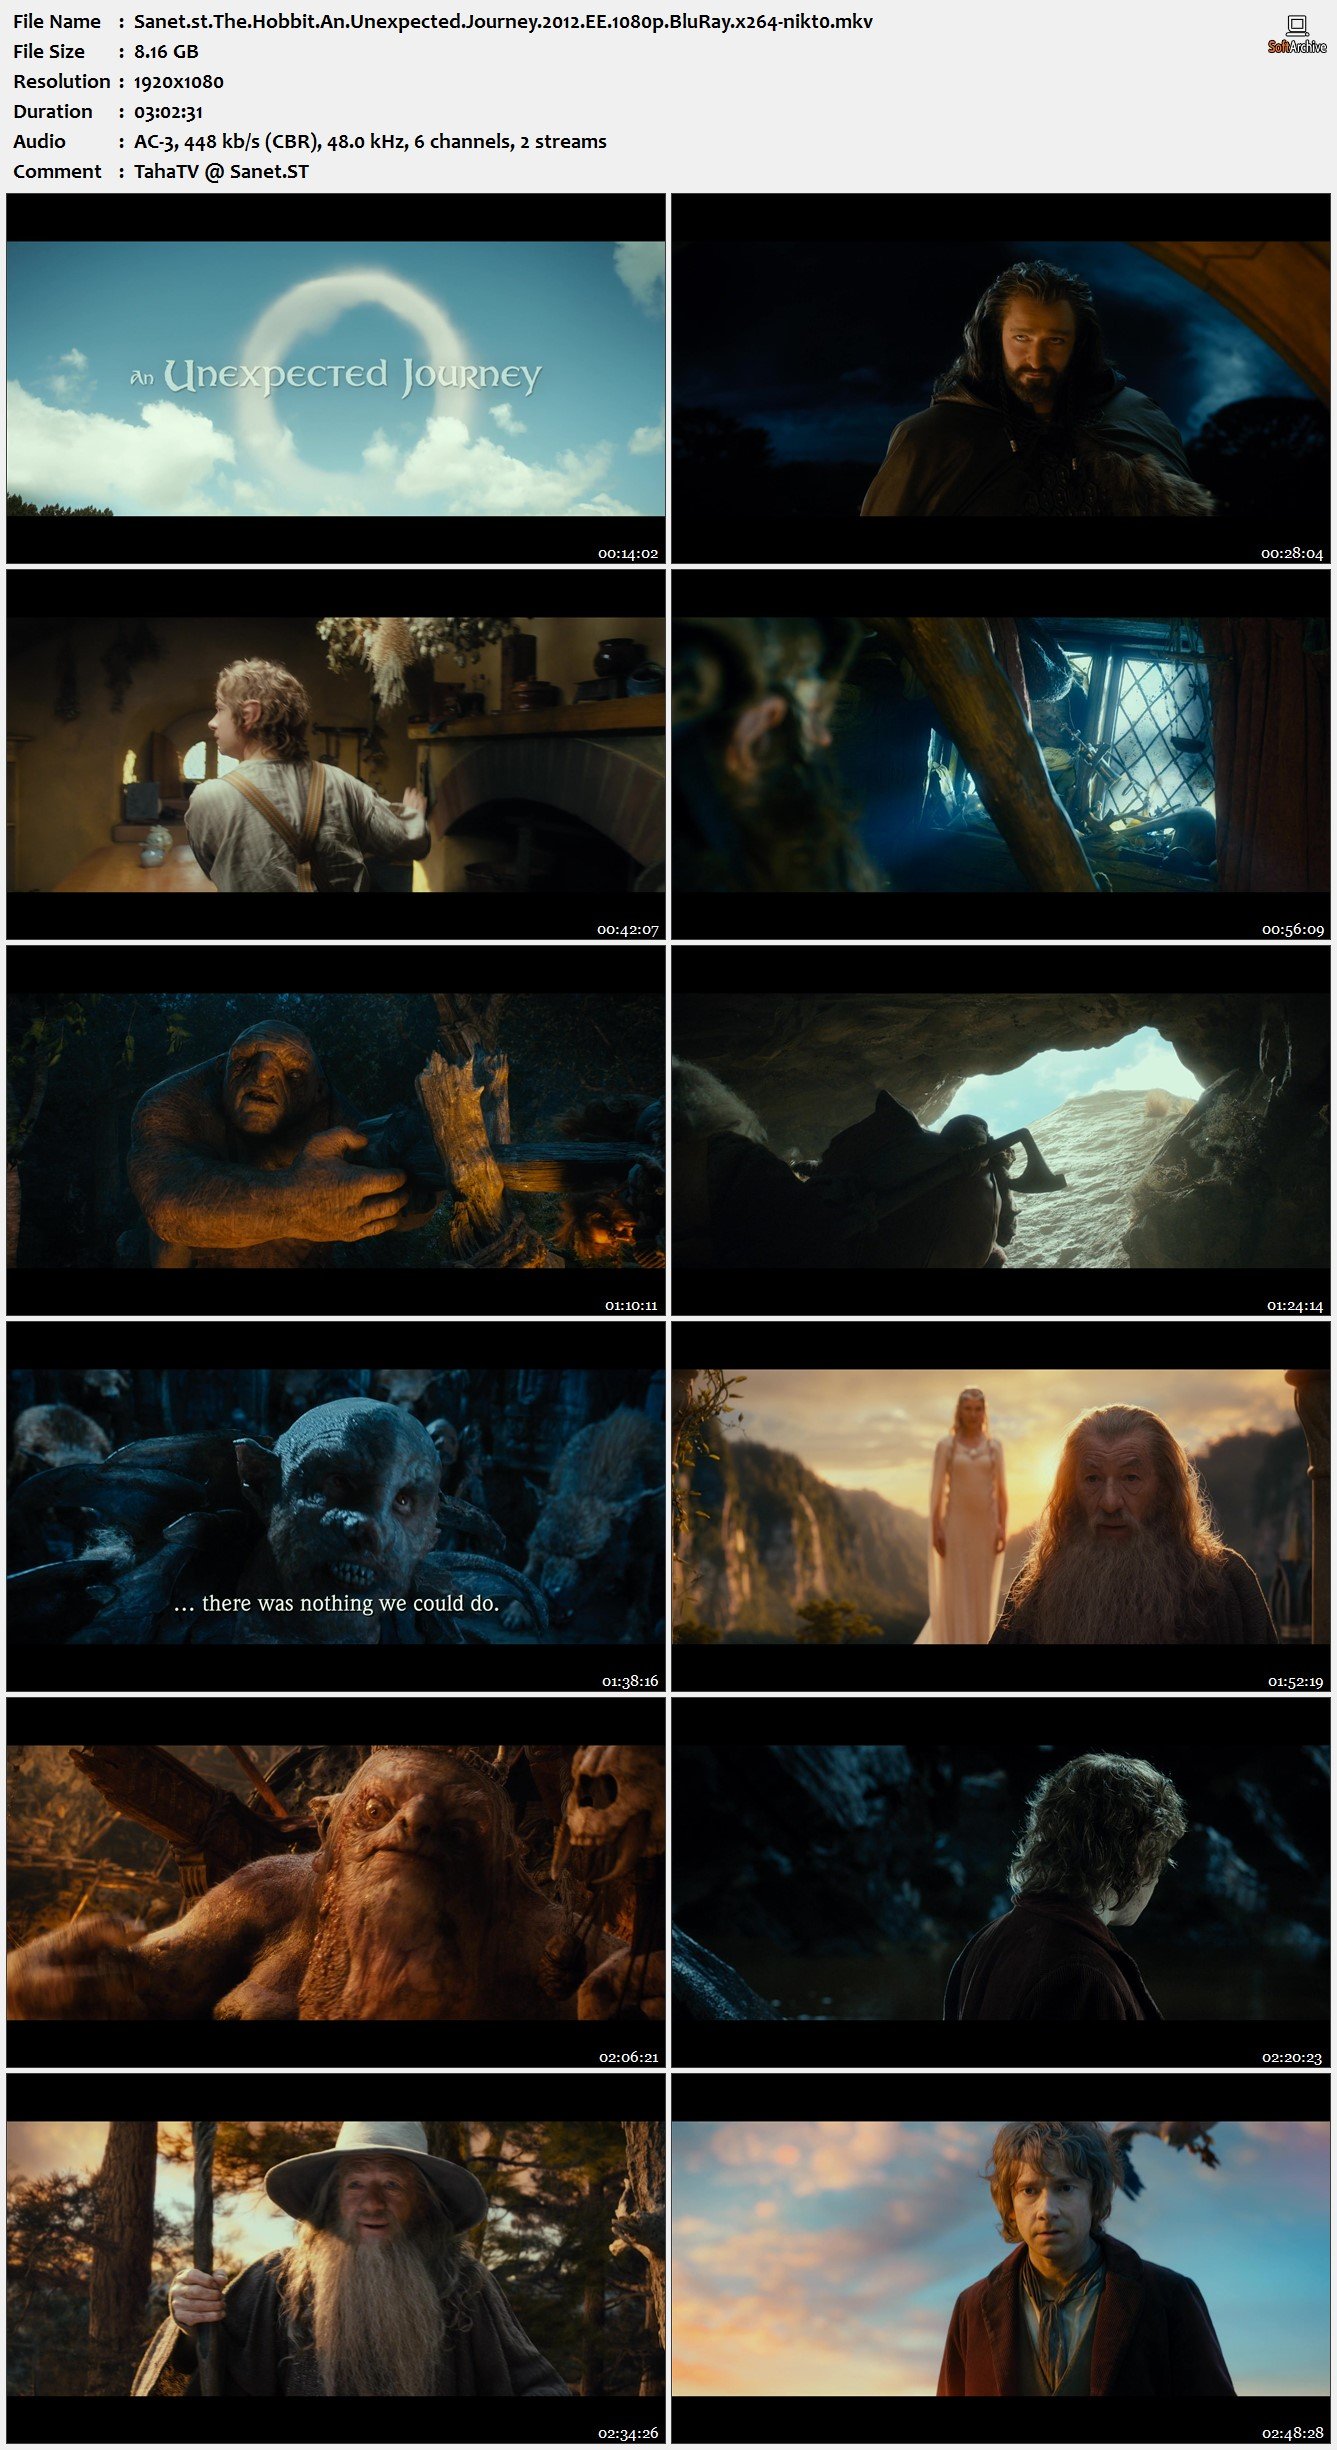 instal the last version for iphoneThe Hobbit: An Unexpected Journey